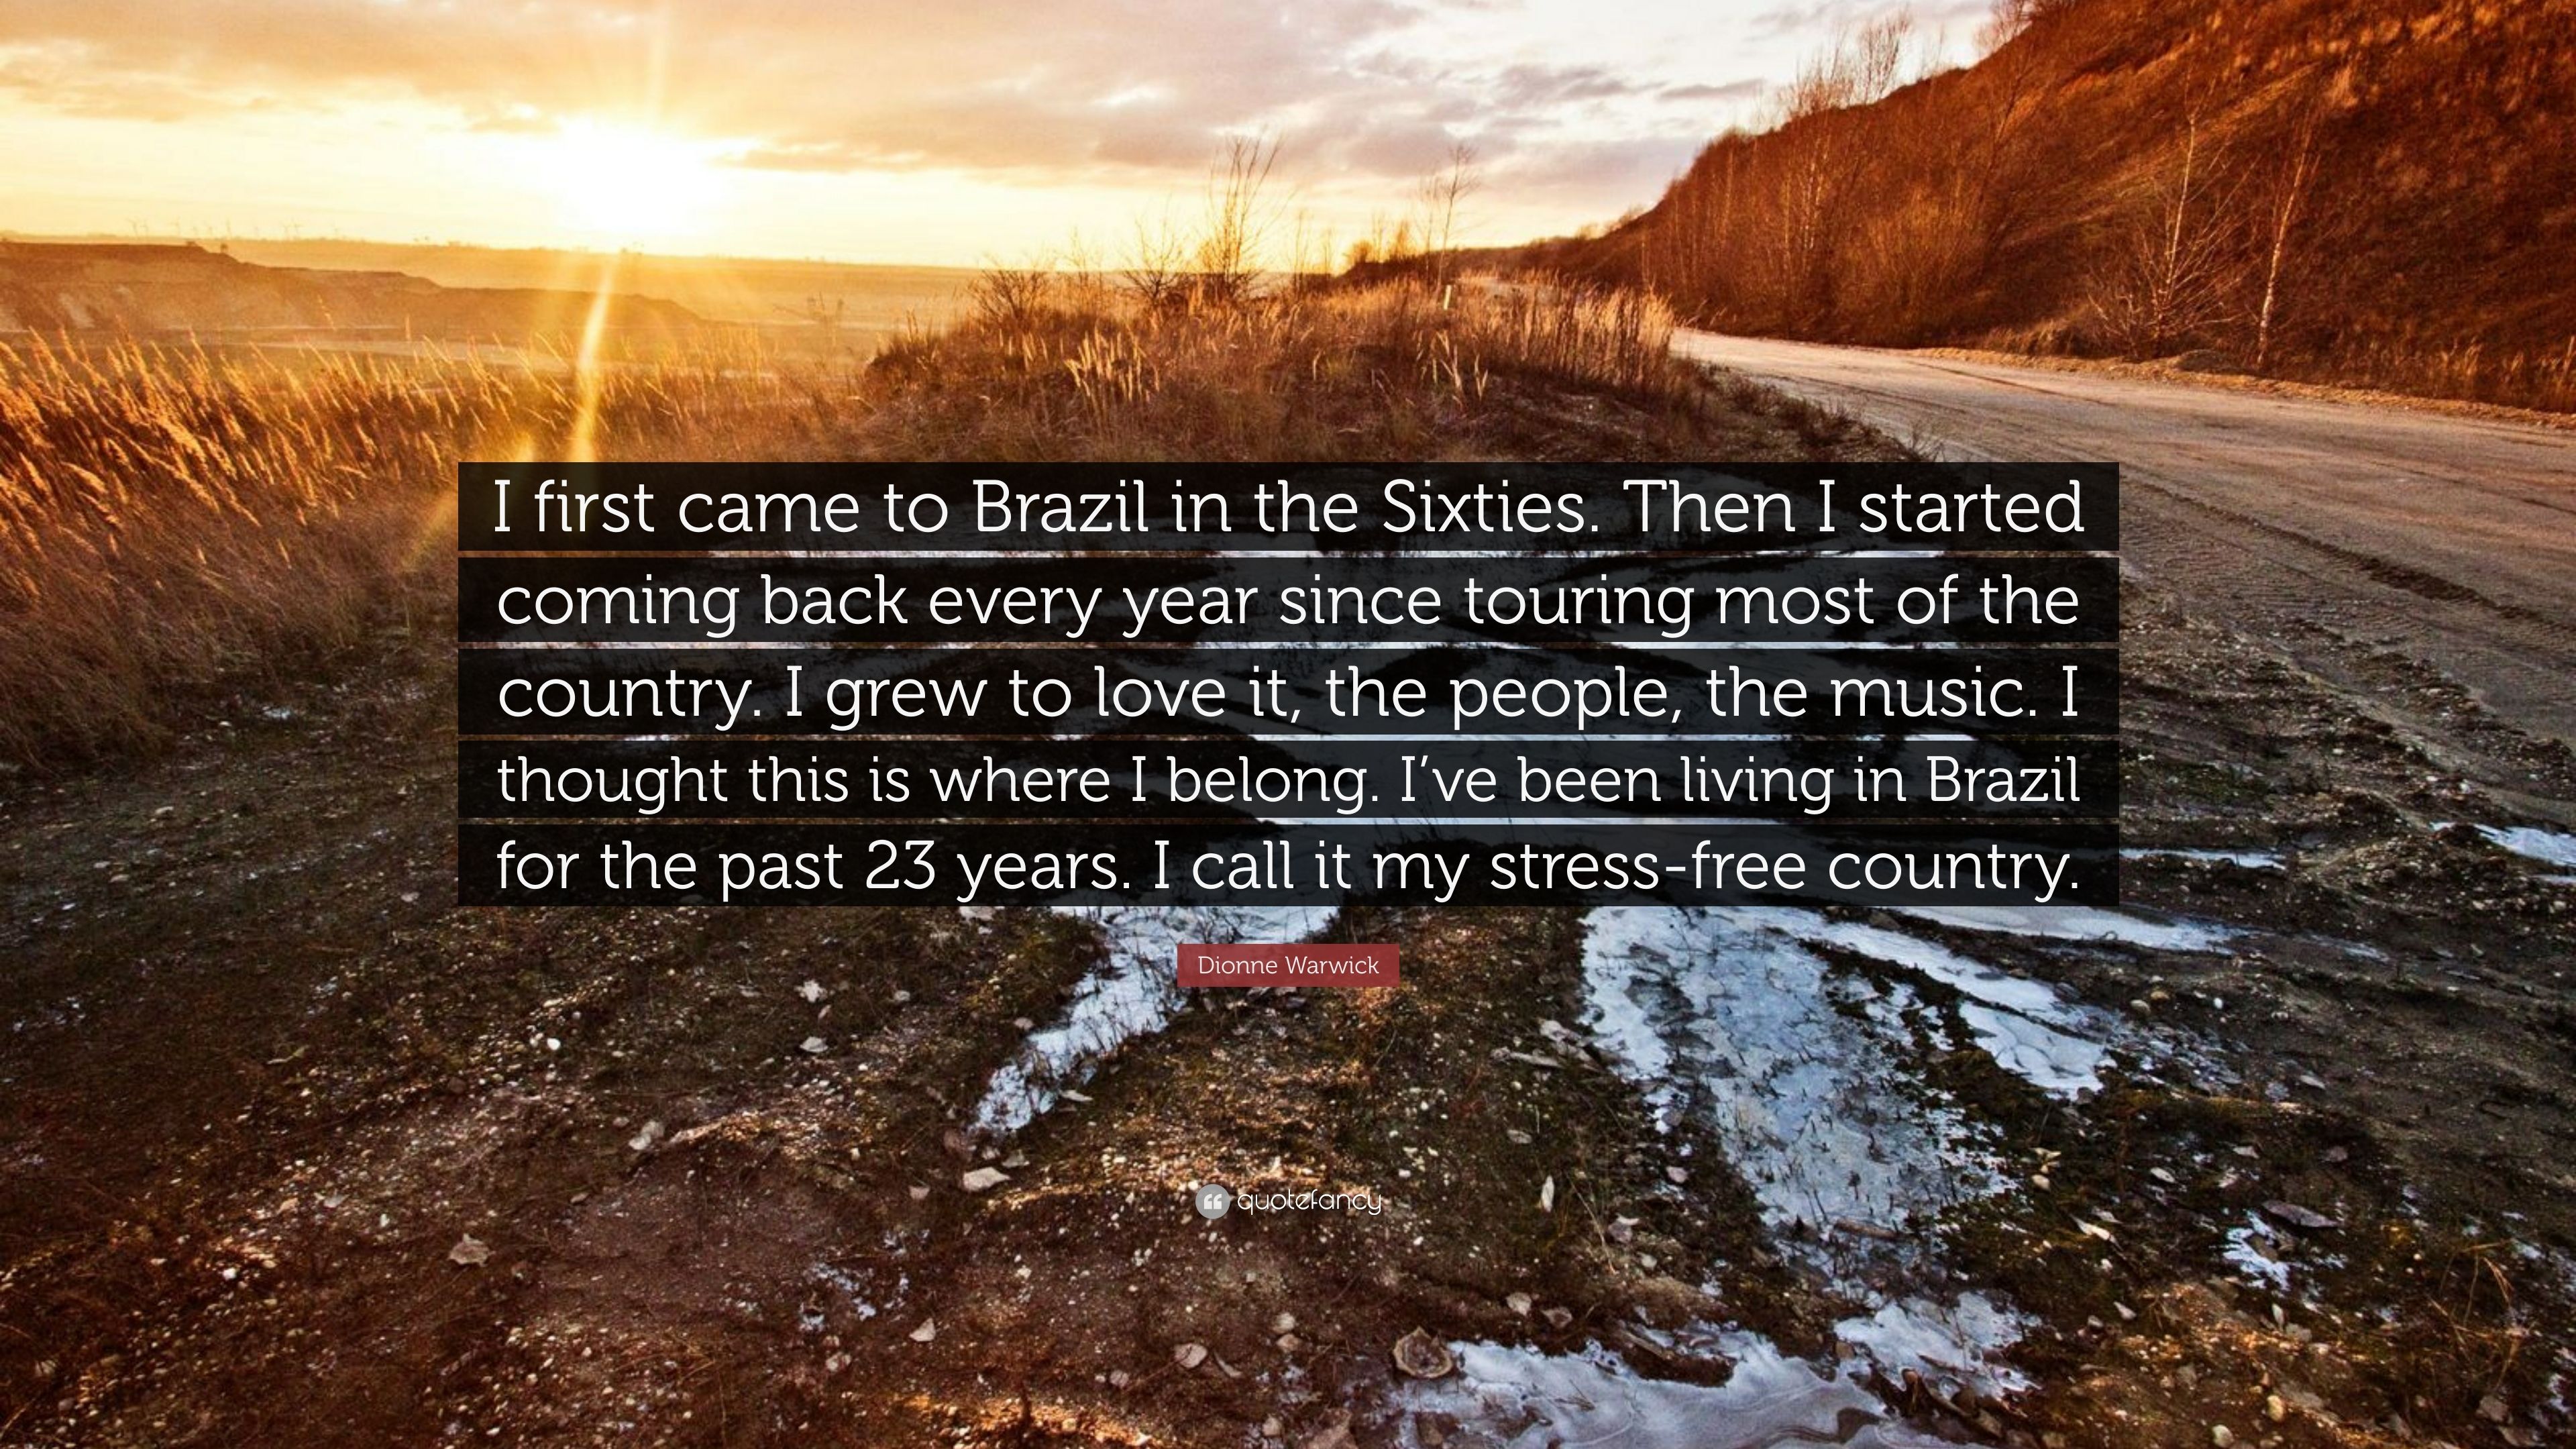 Dionne Warwick Quote: “I first came to Brazil in the Sixties. Then I